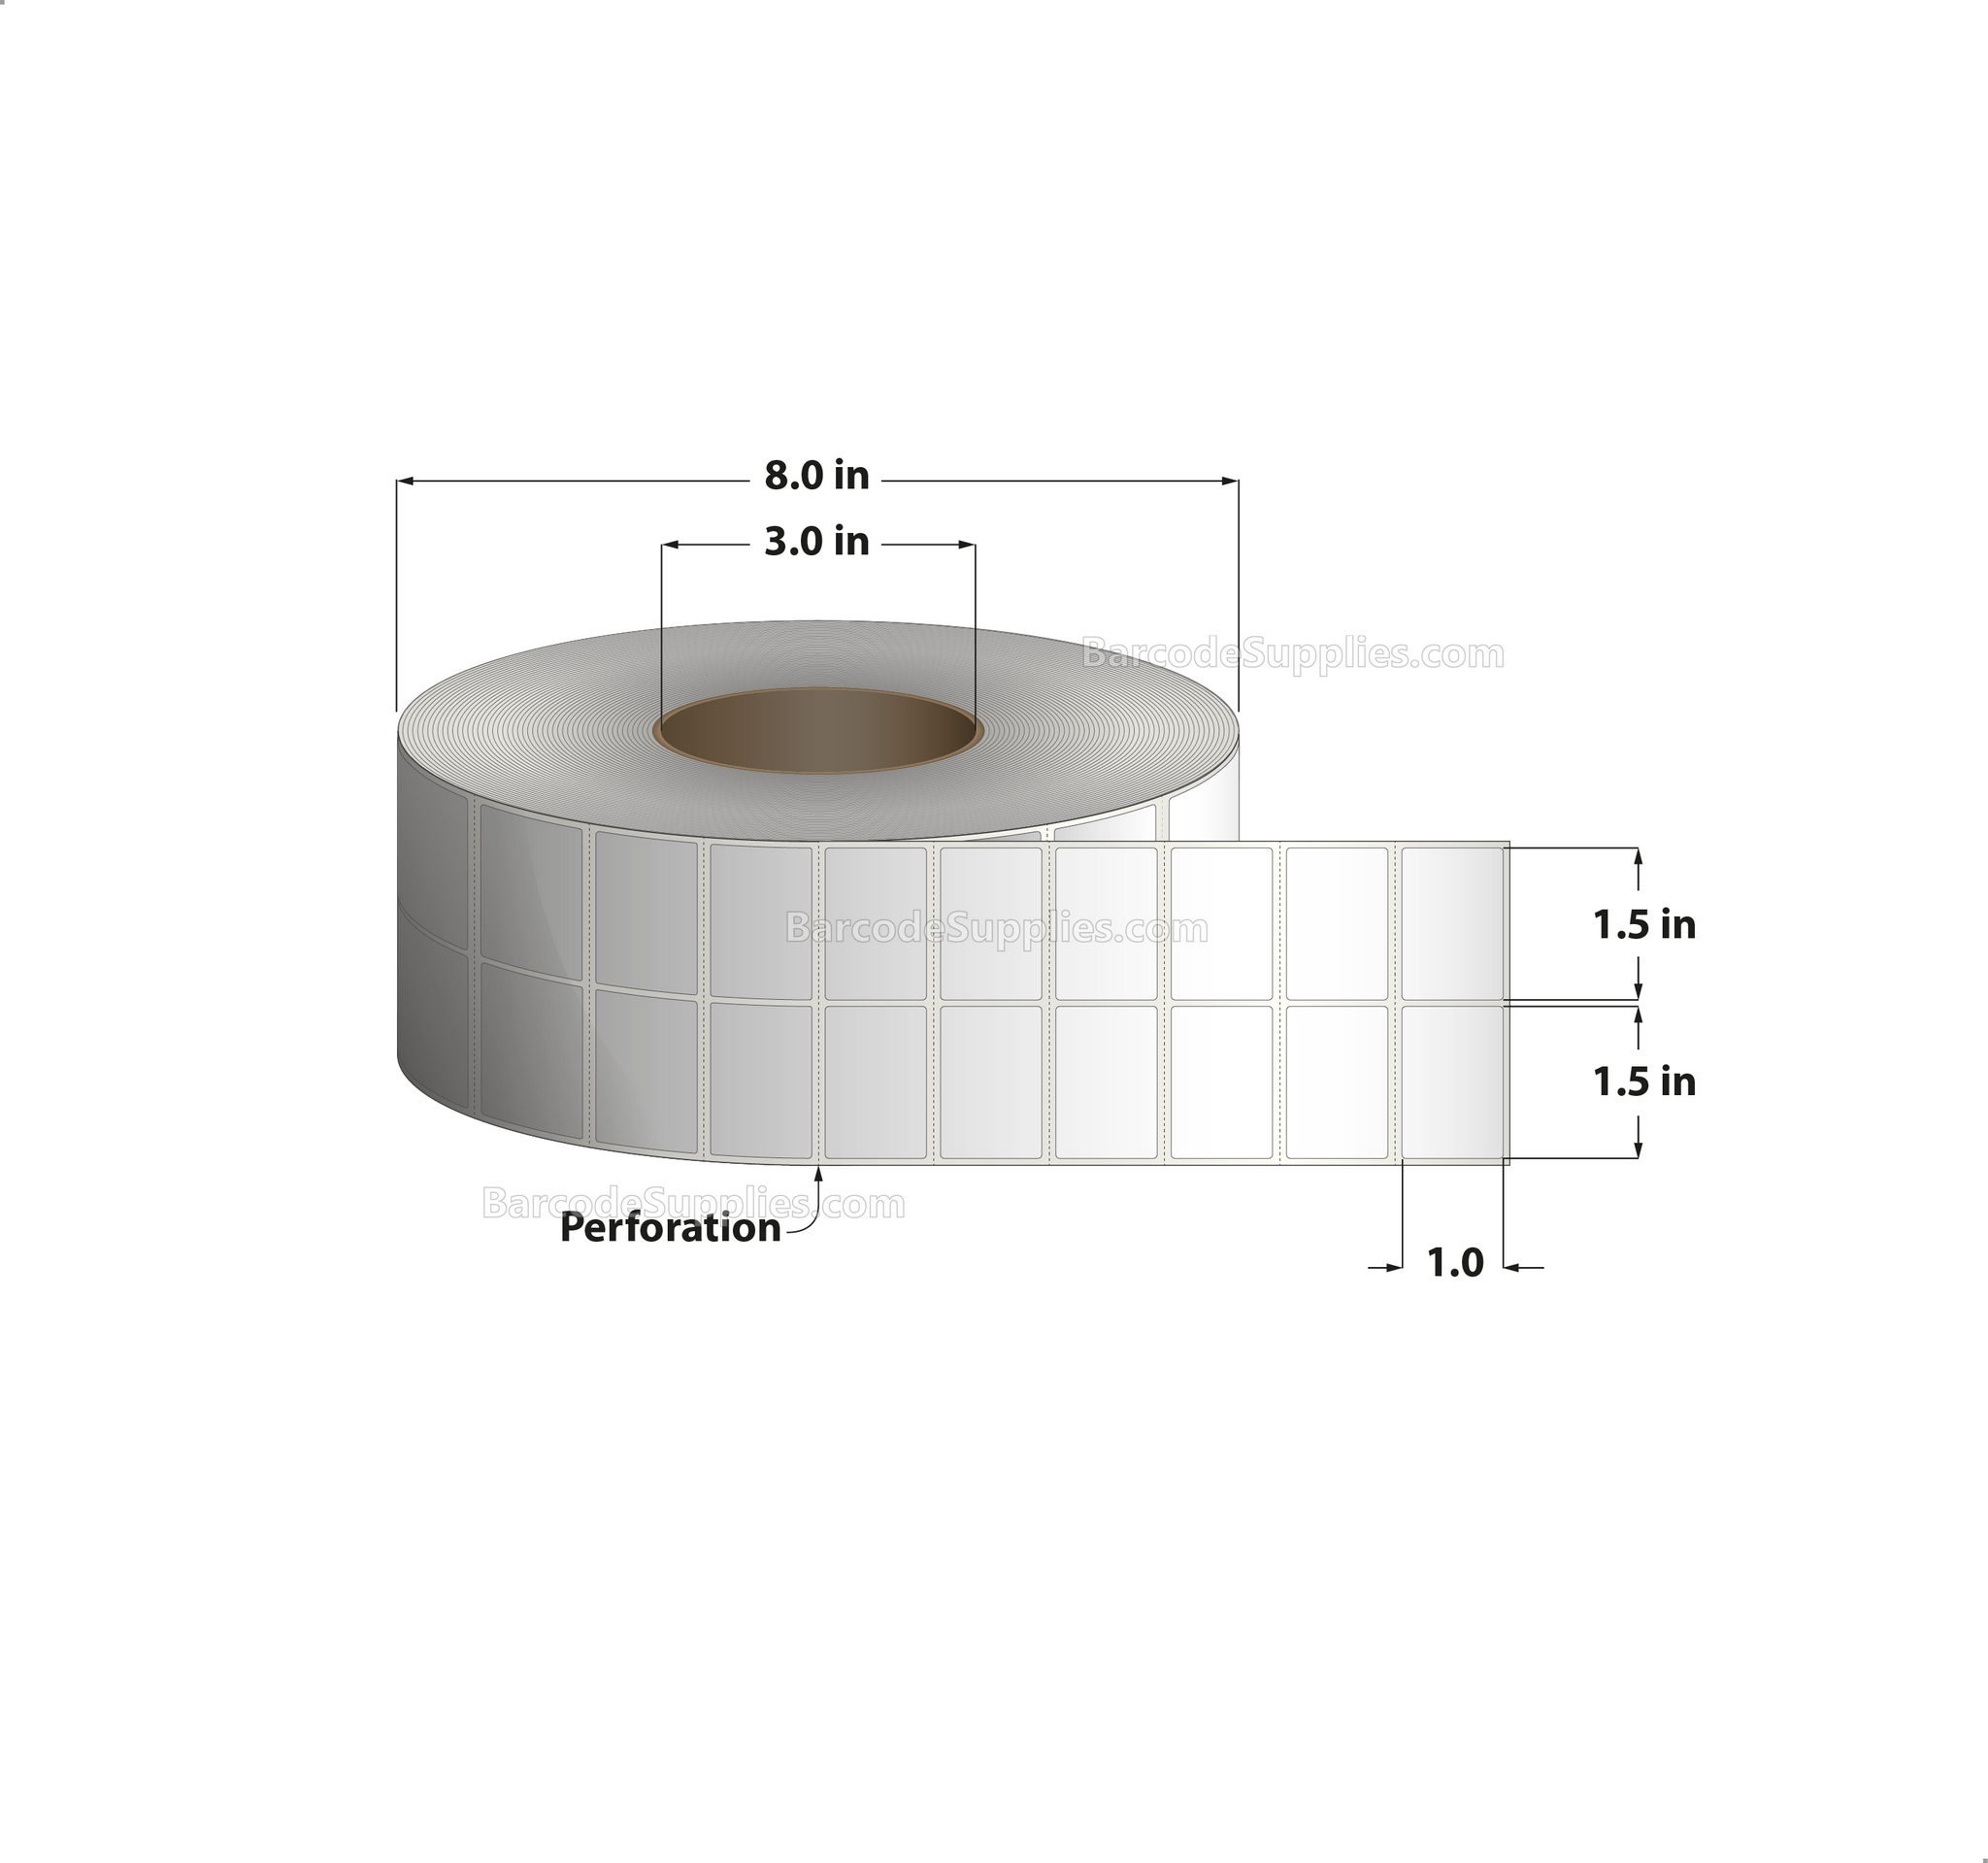 1.5 x 1 Thermal Transfer White Labels With Permanent Adhesive - Perforated - 10,000 Labels Per Roll - Carton Of 4 Rolls - 40000 Labels Total - MPN: RT-15-1-10000-3